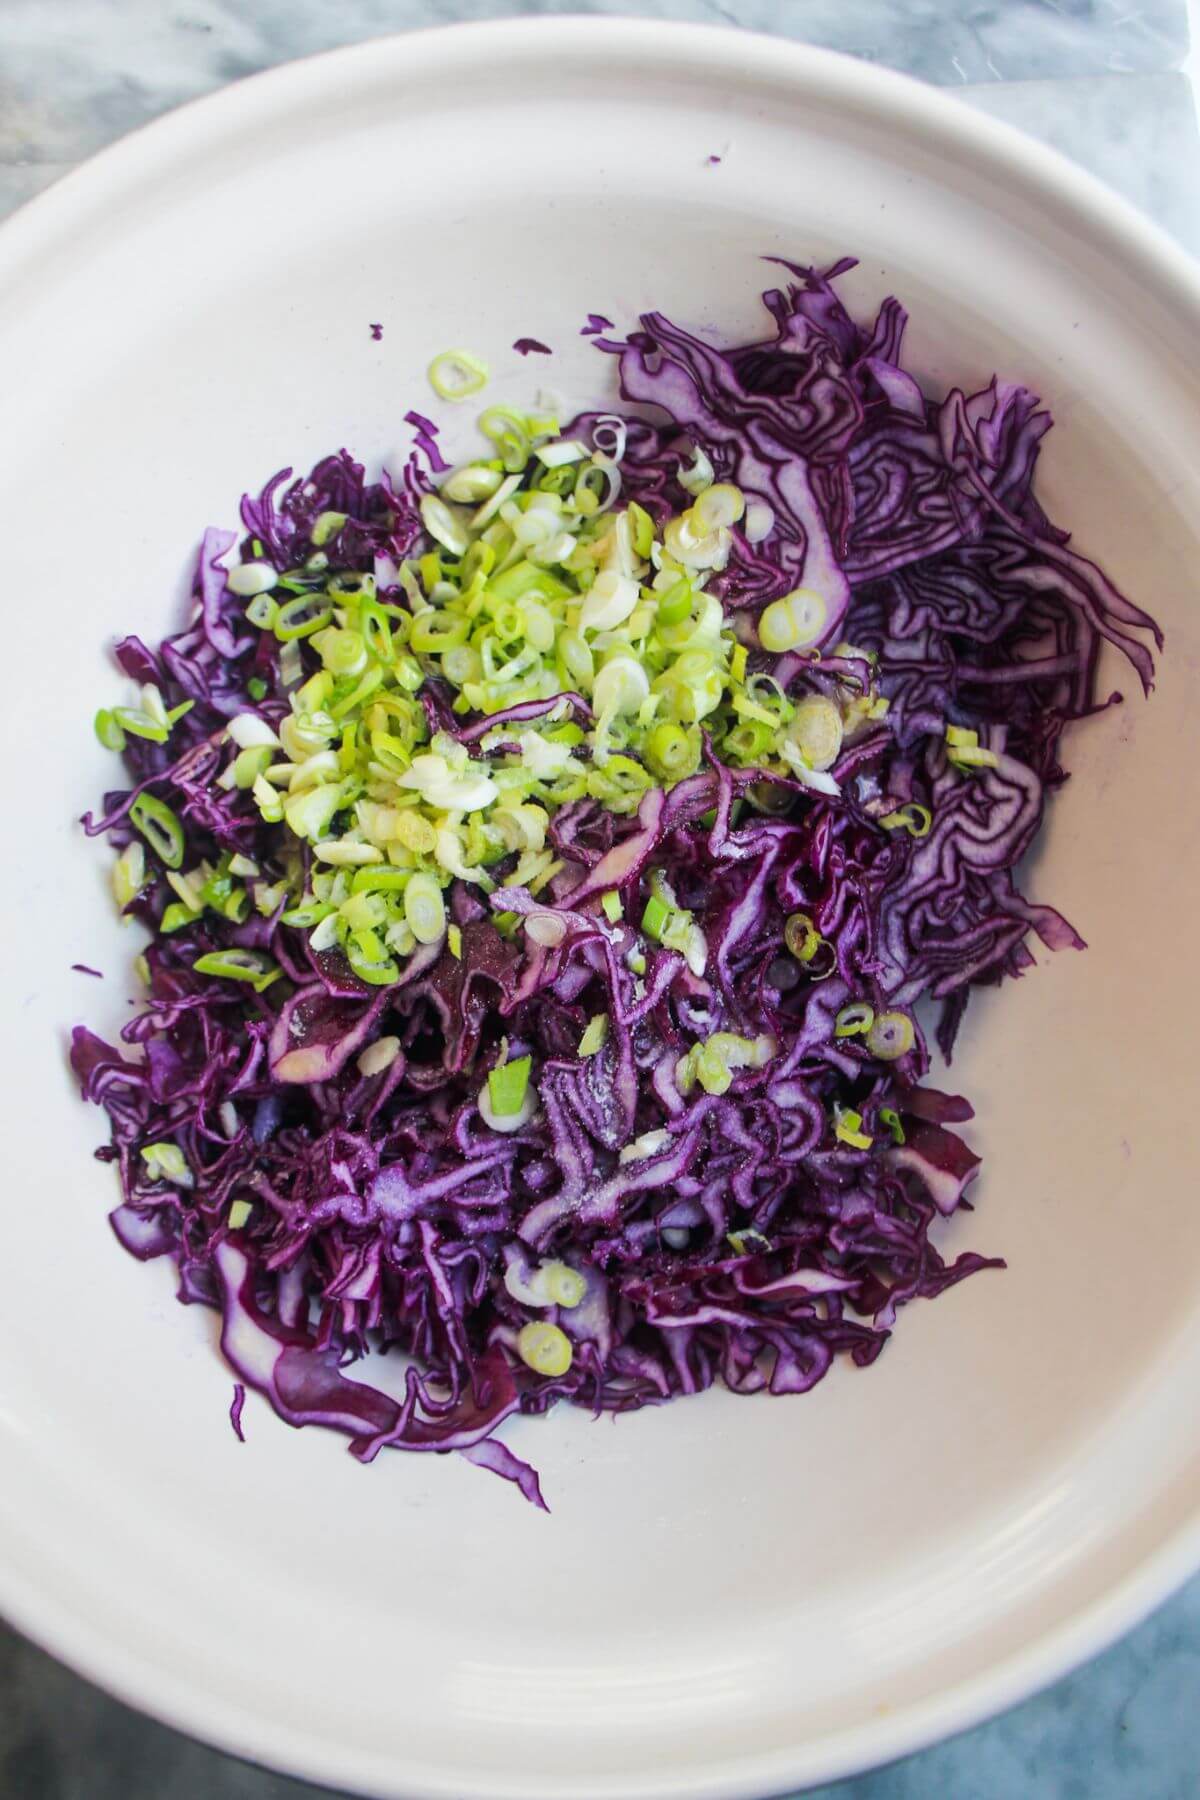 Shredded red cabbage and spring onion in a large mixing bowl.